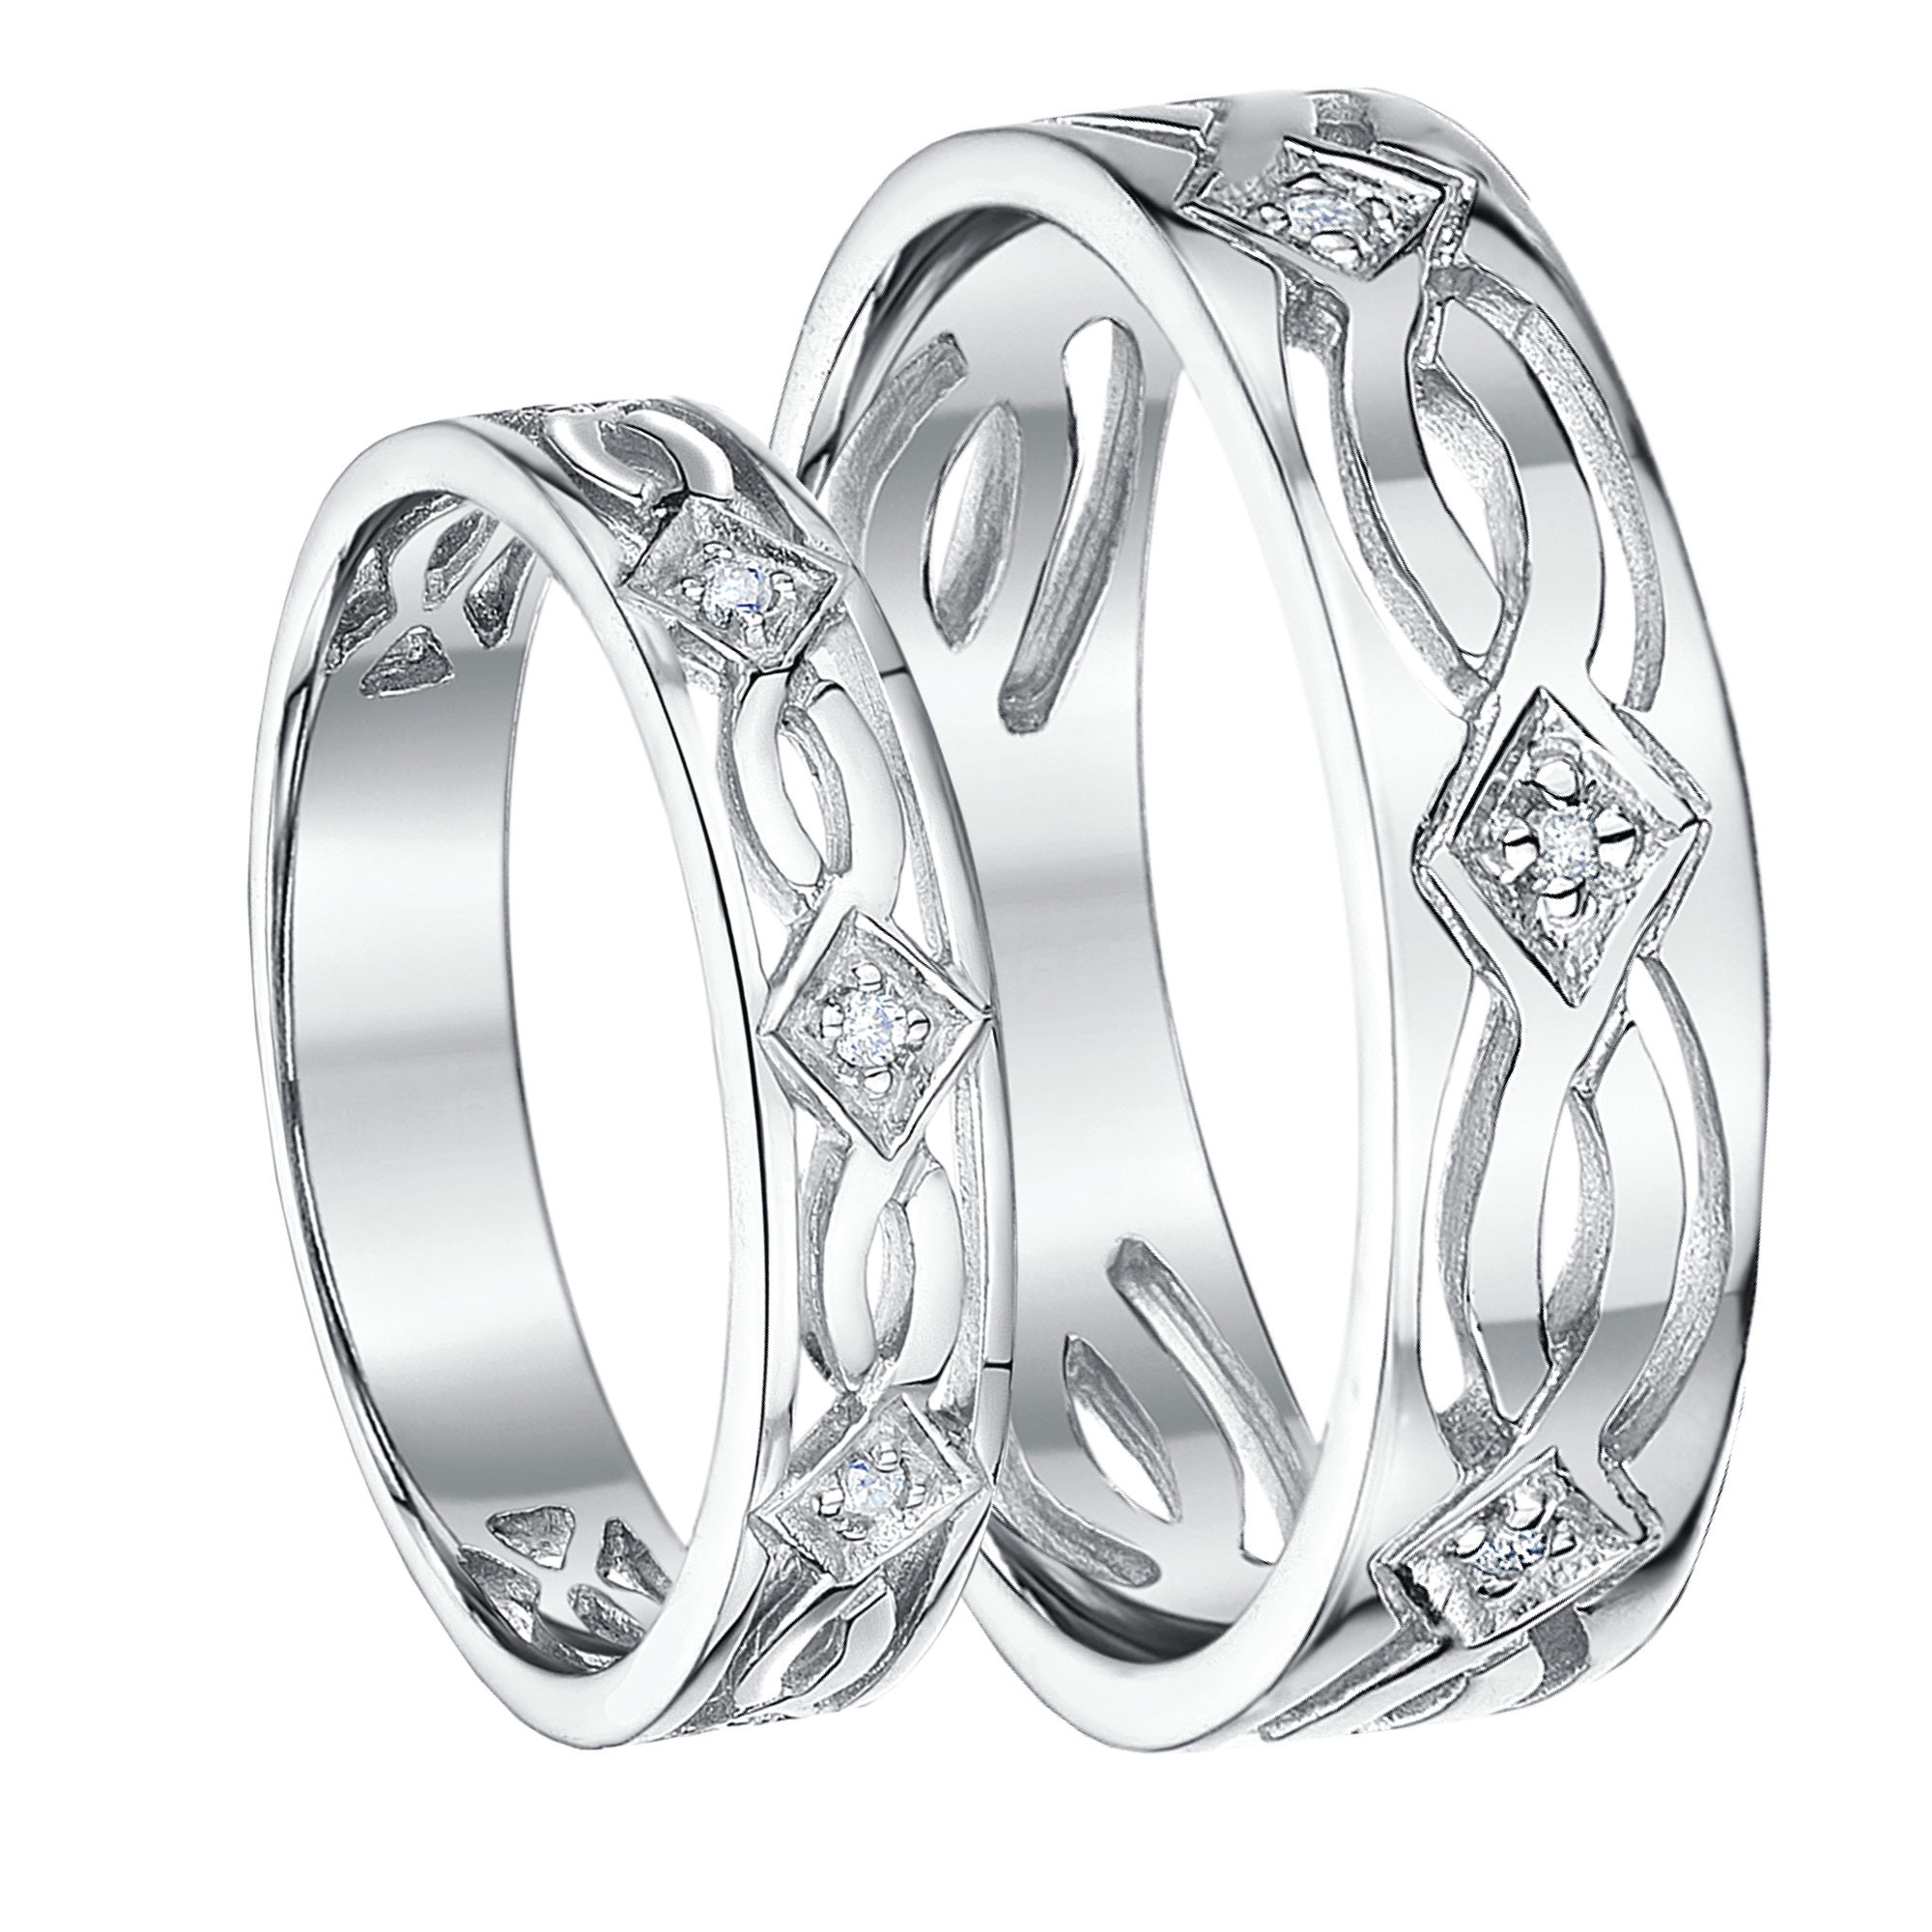 White Gold Wedding Ring Sets His And Hers
 His & Hers White Gold Wedding Rings Matching Sets For